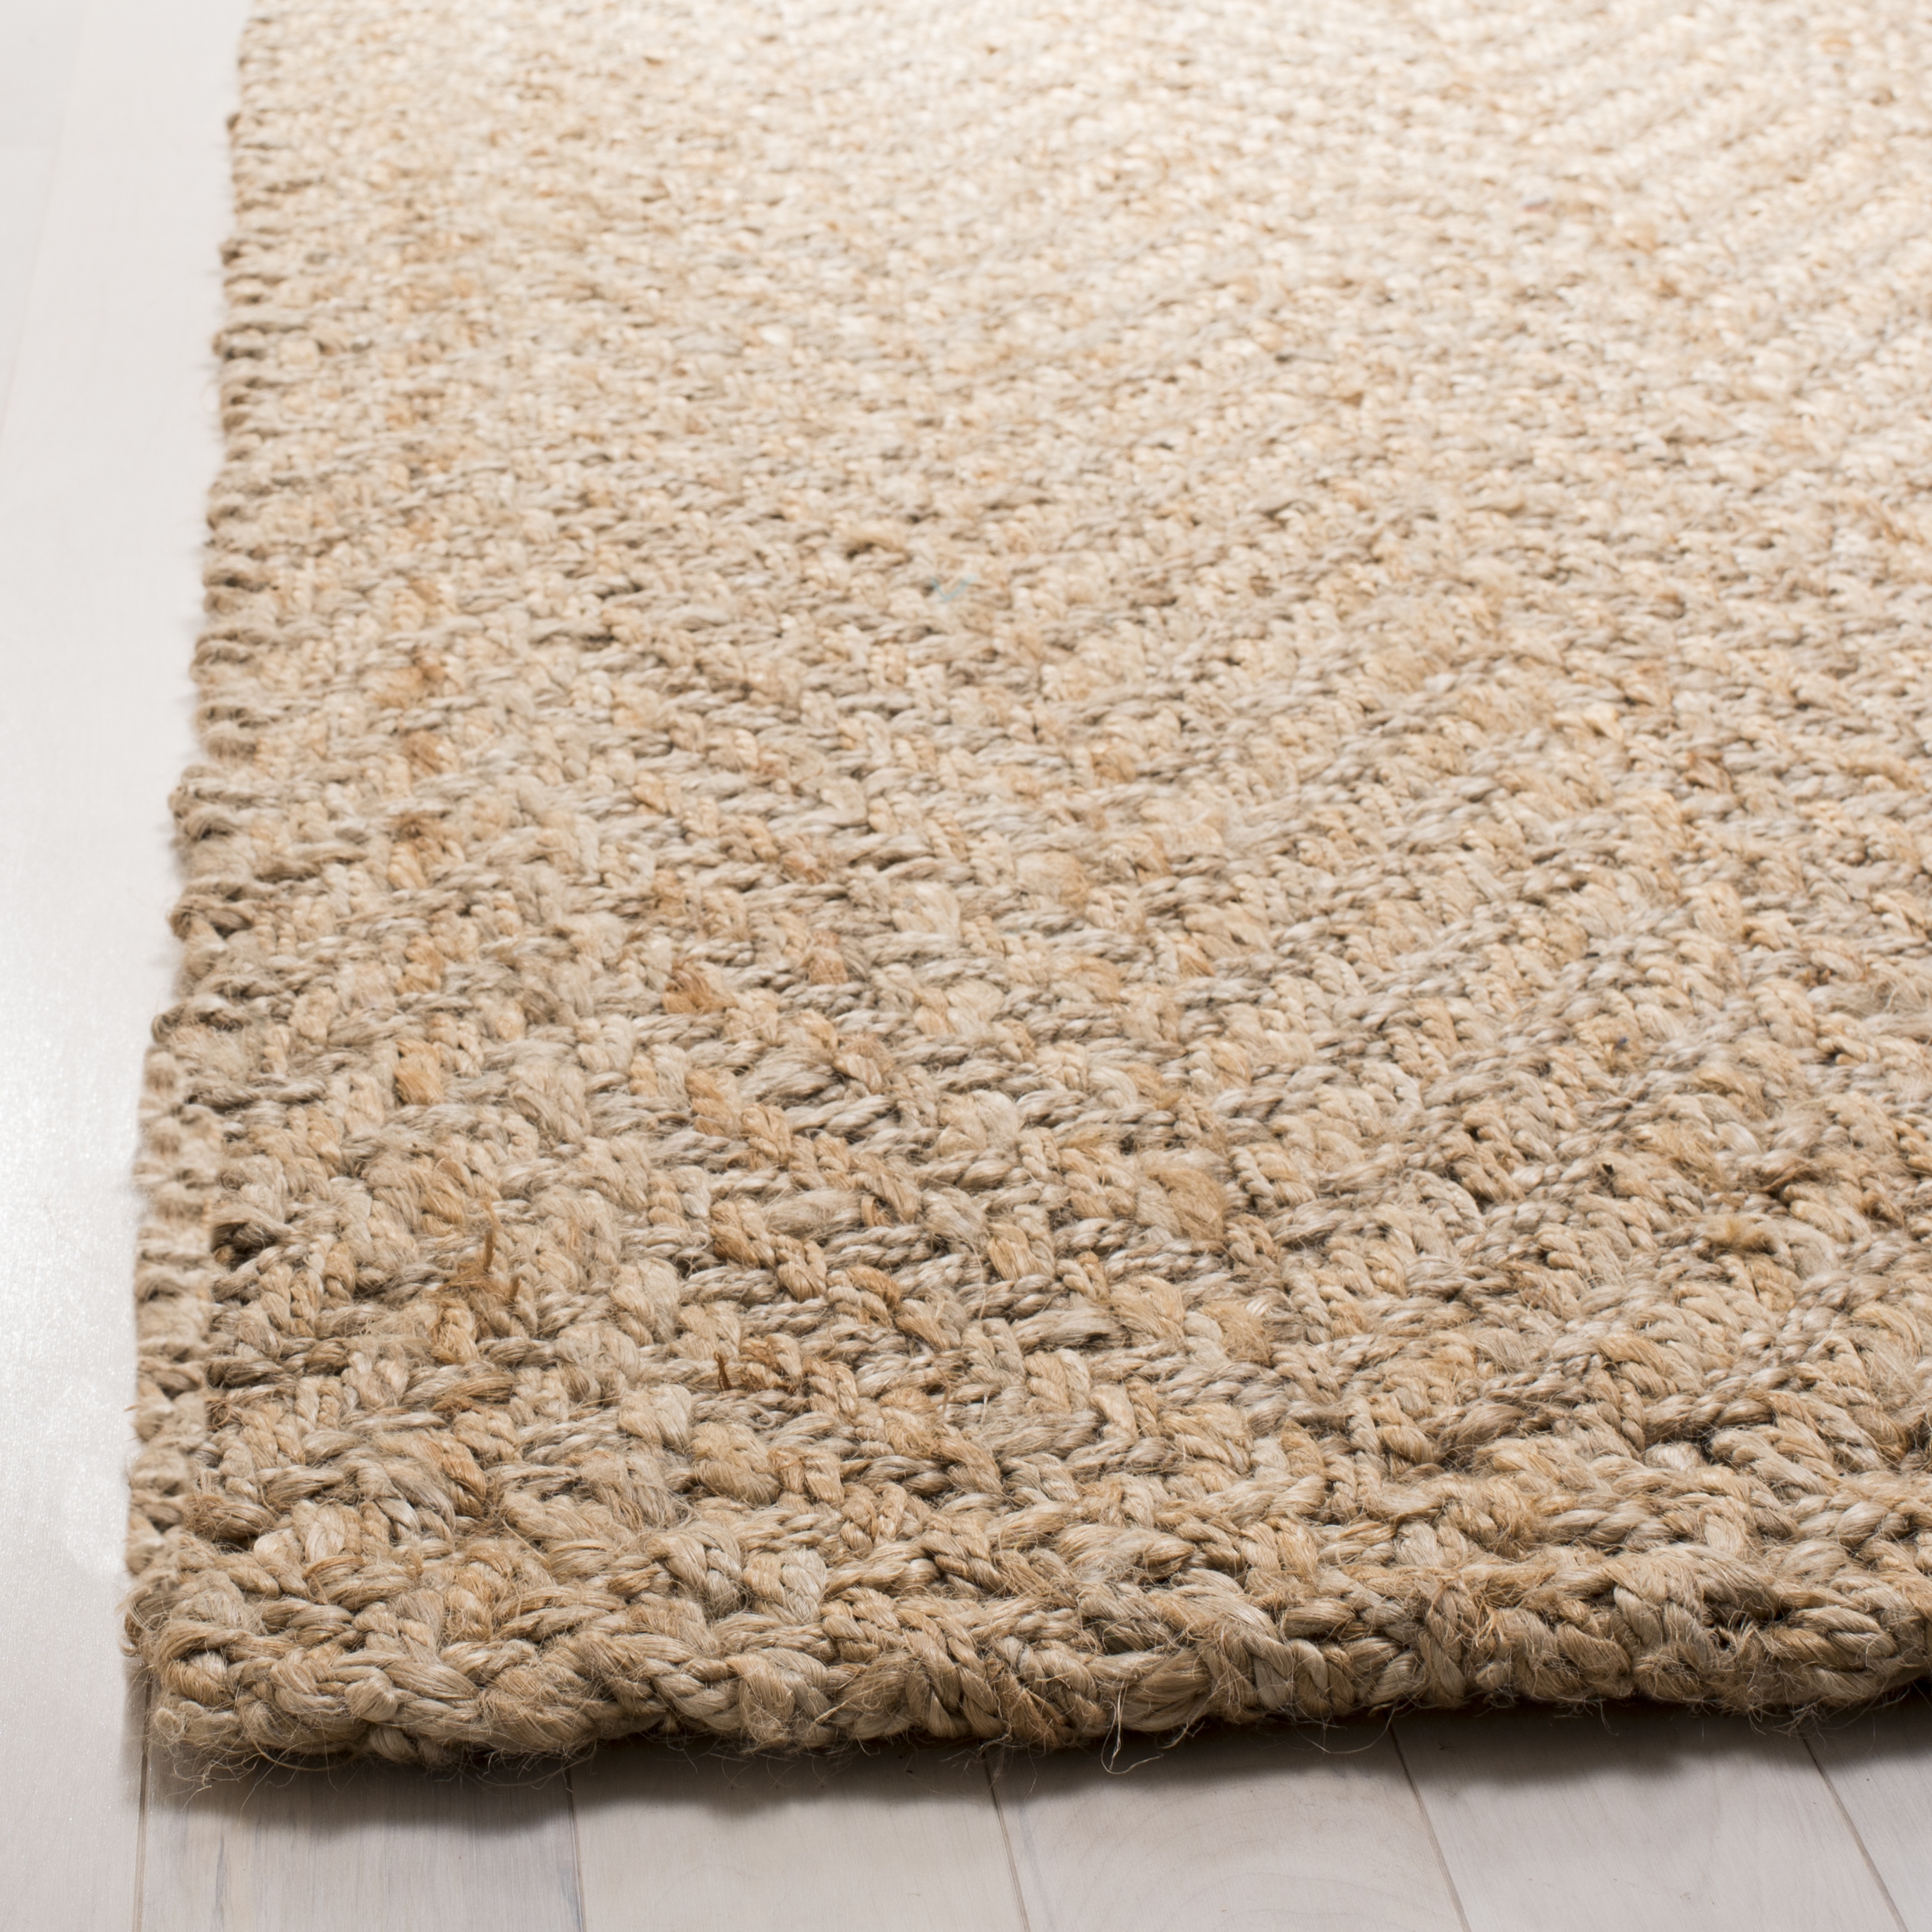 Arlo Home Hand Woven Area Rug, NF265A, Natural,  3' X 5' - Image 2